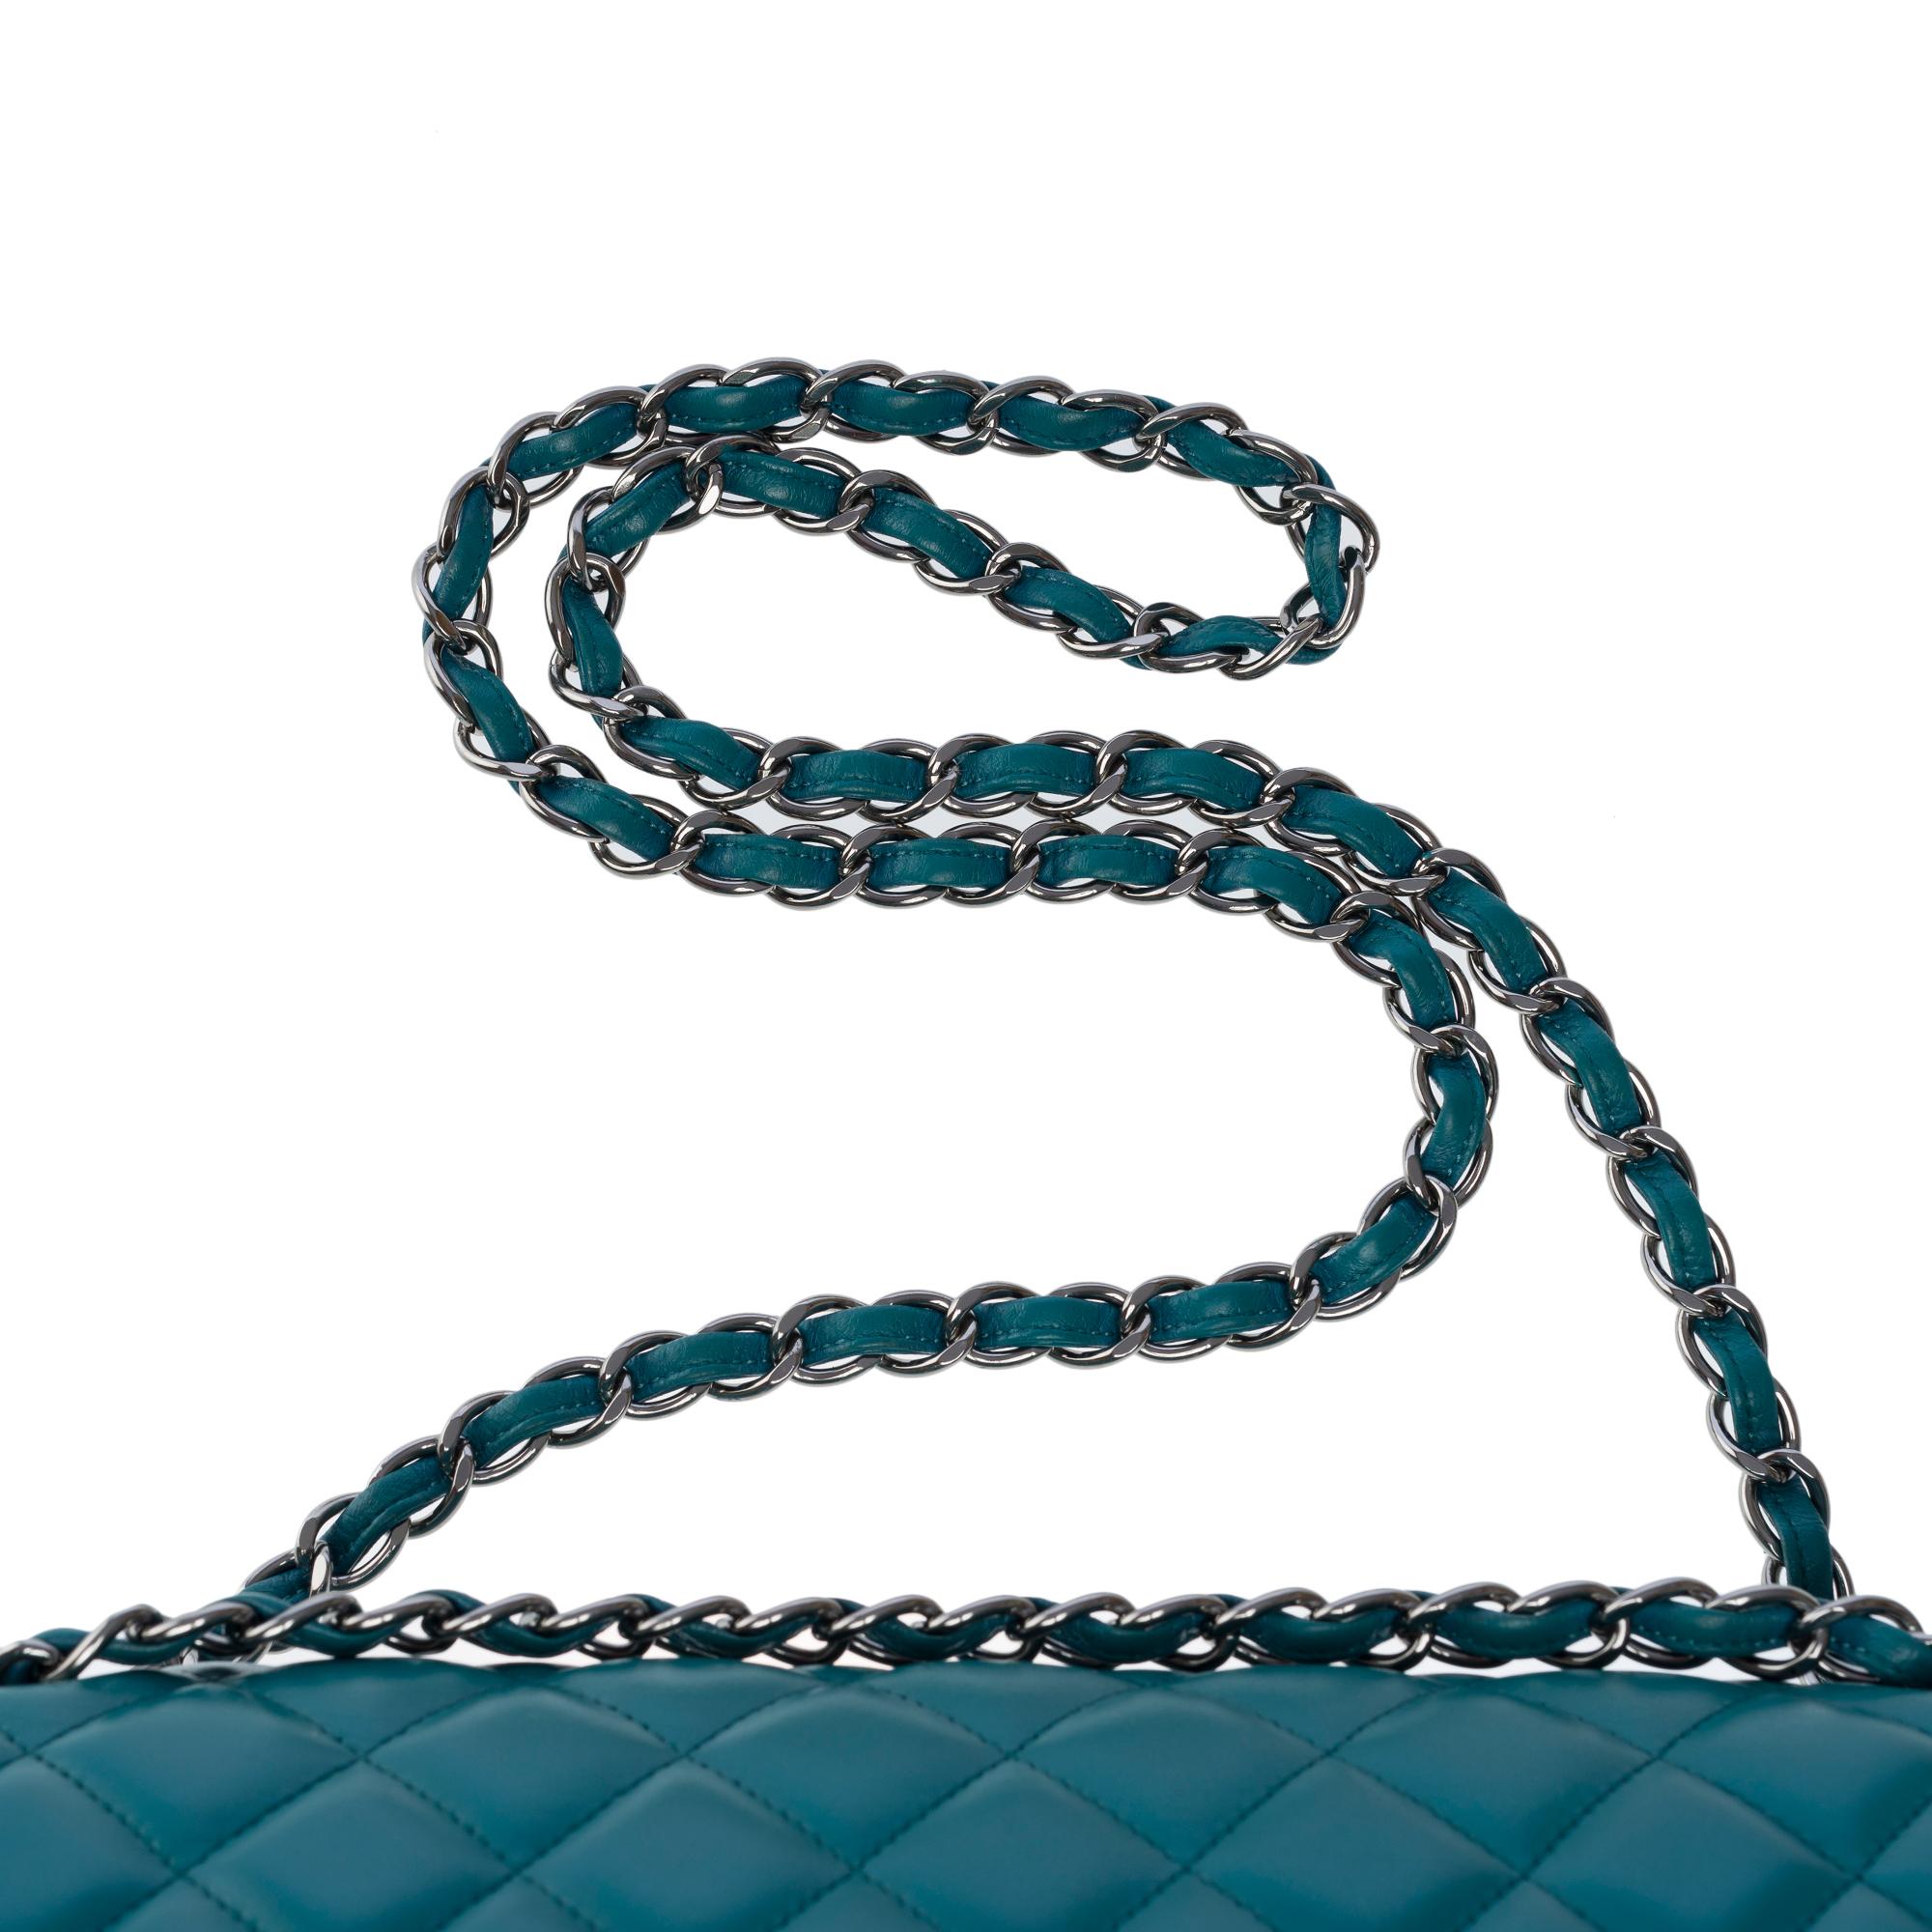 Chanel Timeless Maxi Jumbo shoulder bag in Blue quilted lambskin leather, SHW For Sale 6